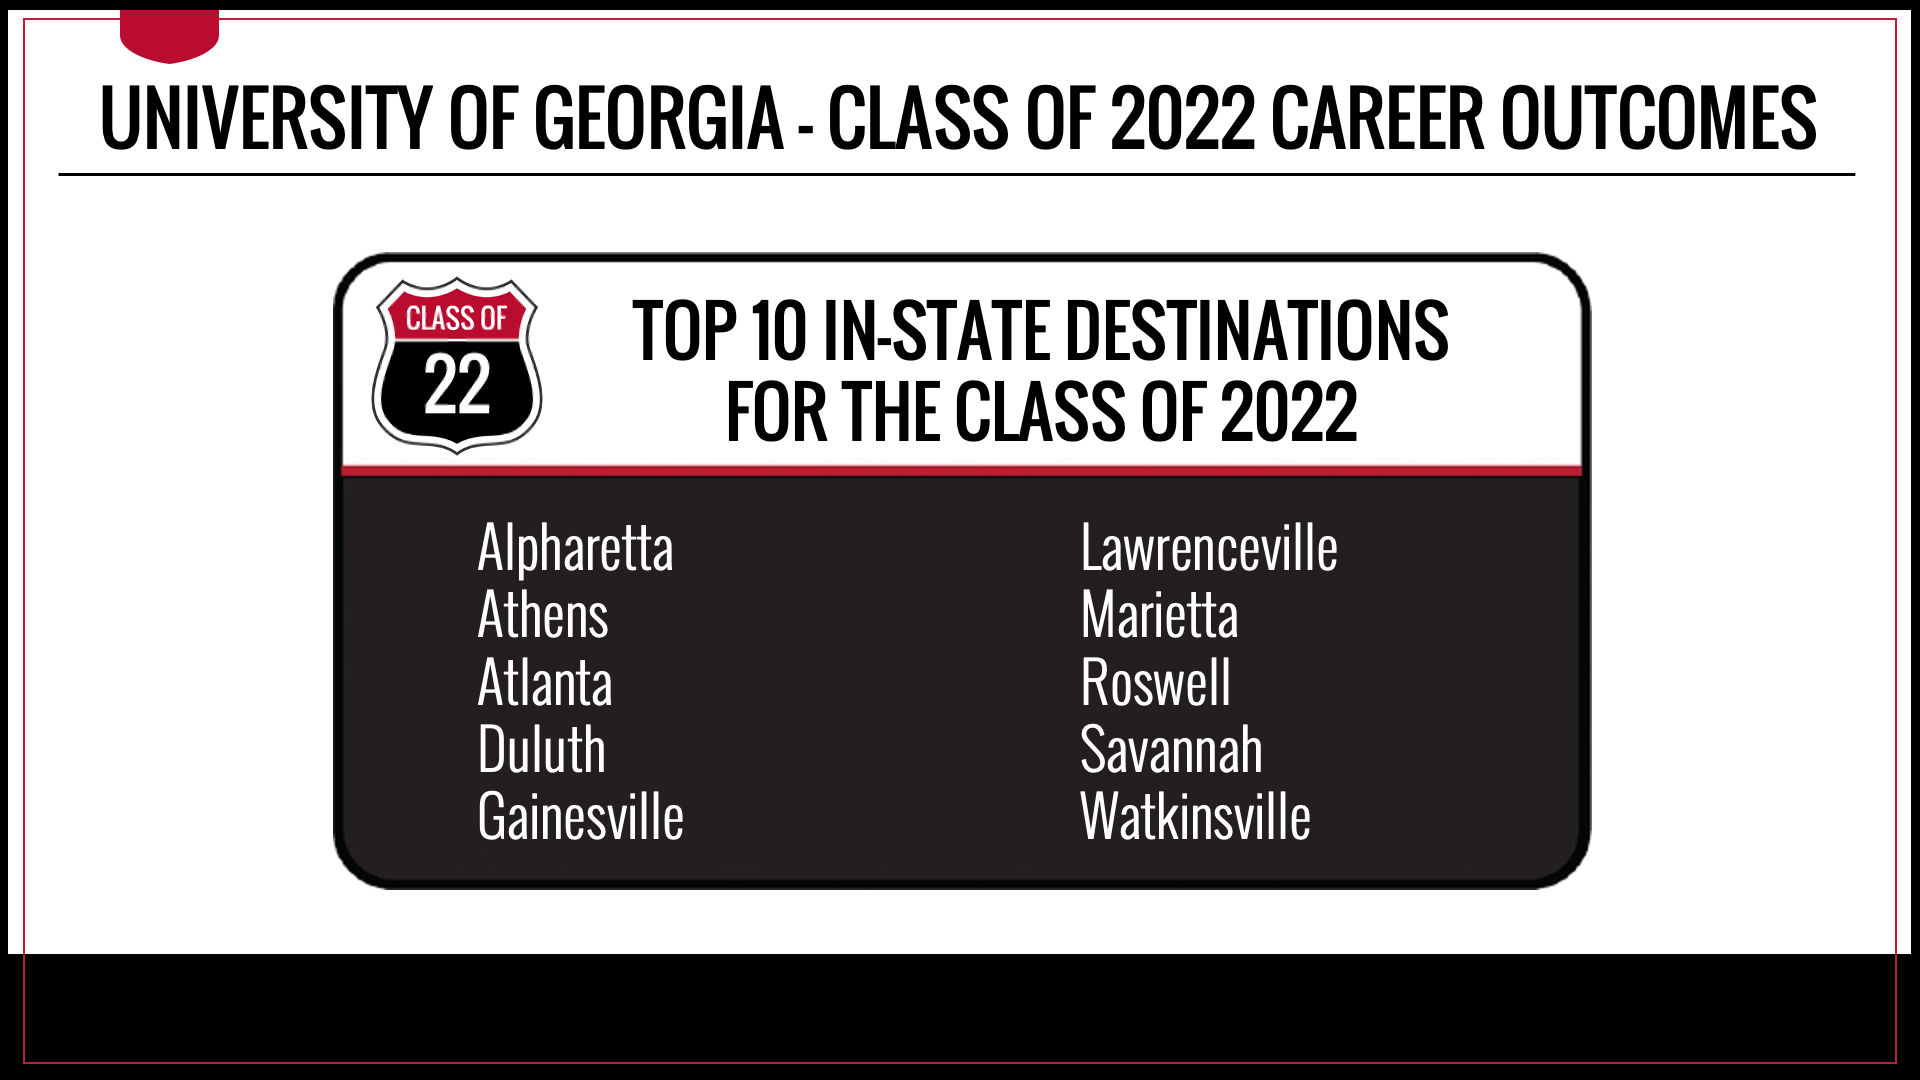 Top In-State destinations for UGA Class of 2022 graduates include Alpharetta, Athens, Atlanta, Duluth, Gainesville, Lawrenceville, Marietta, Roswell, Savannah, and Watkinsville